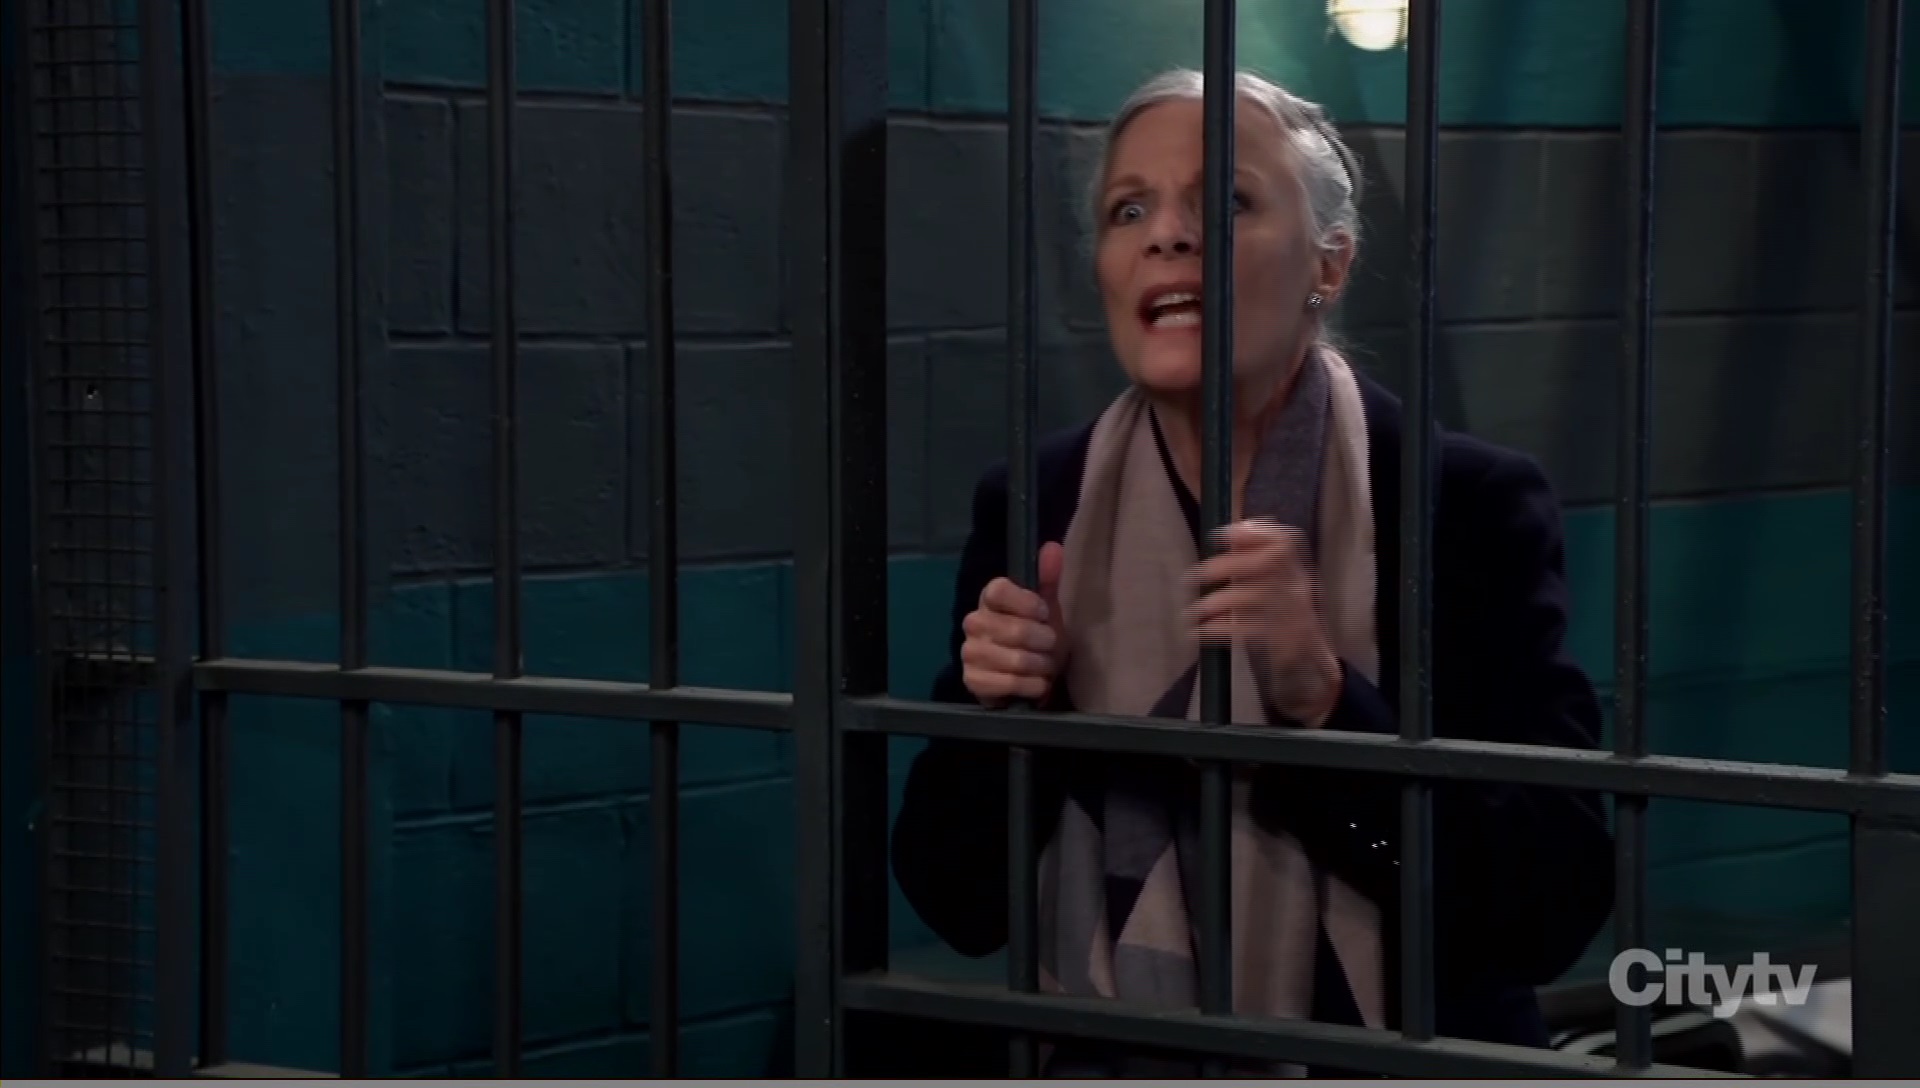 tracy yells from behind bars general hospital